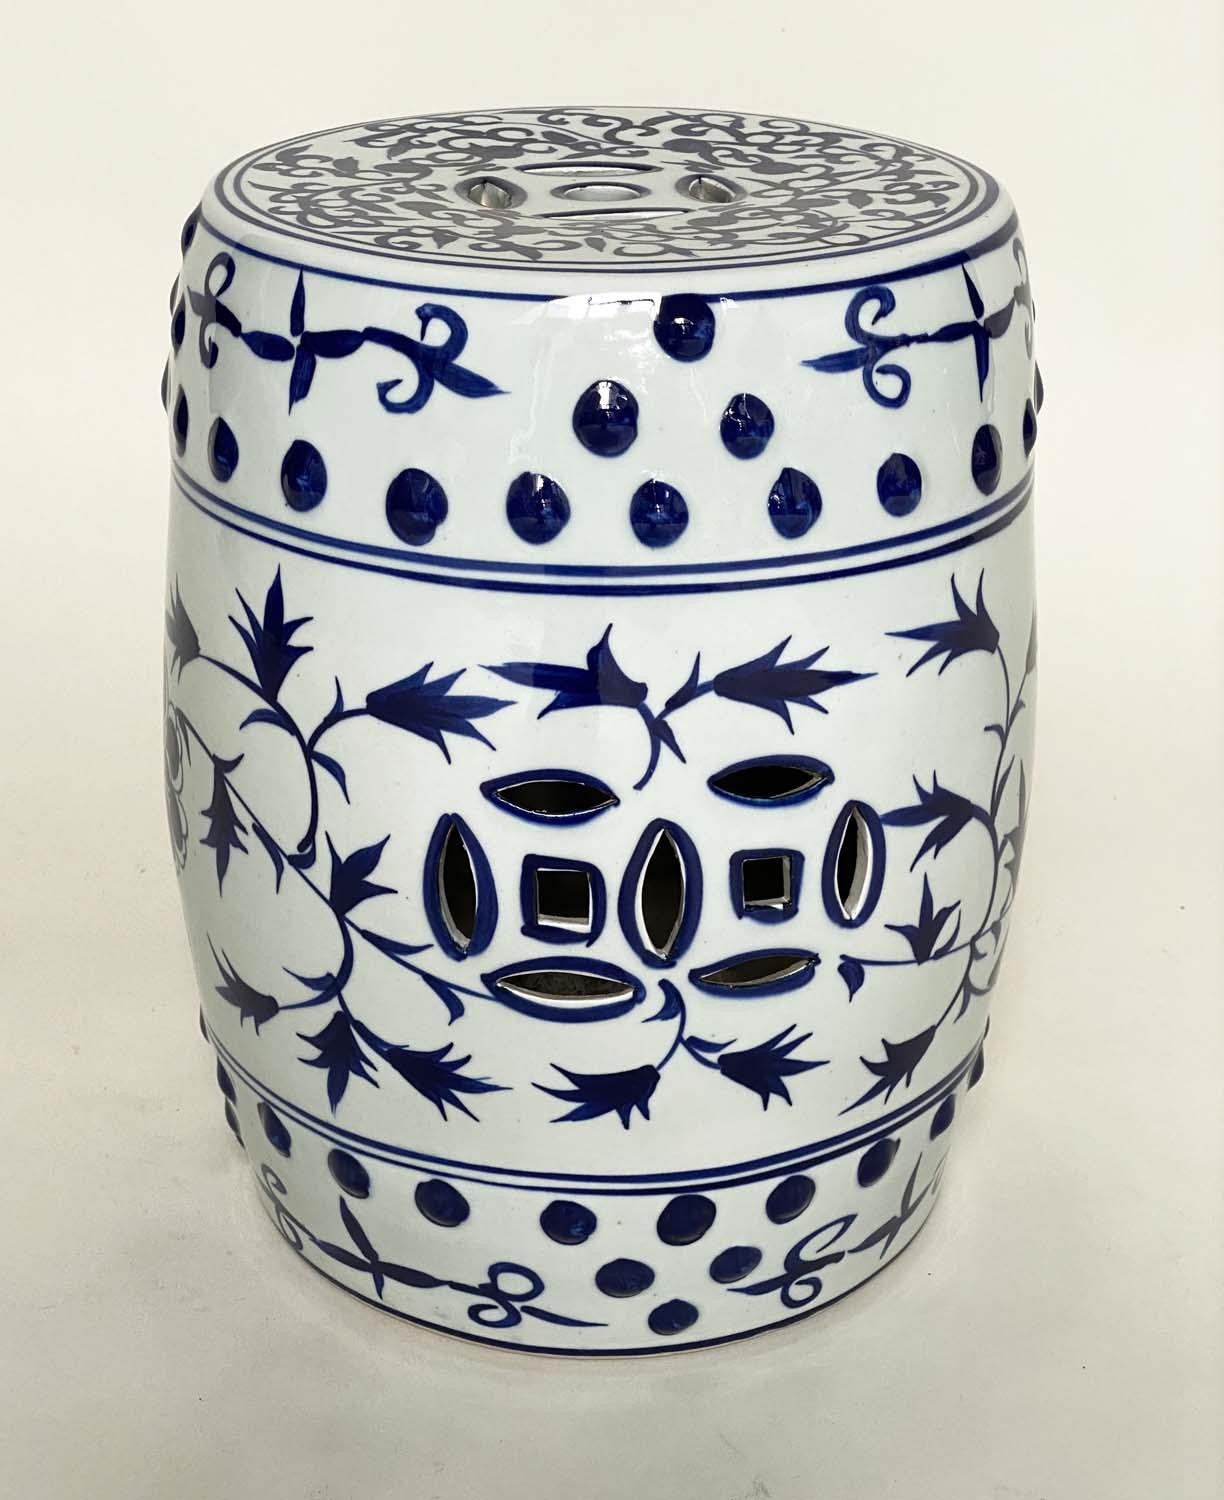 CHINESE STOOL, blue and white ceramic of barrel form with pierced top, 40cm H. - Image 4 of 4